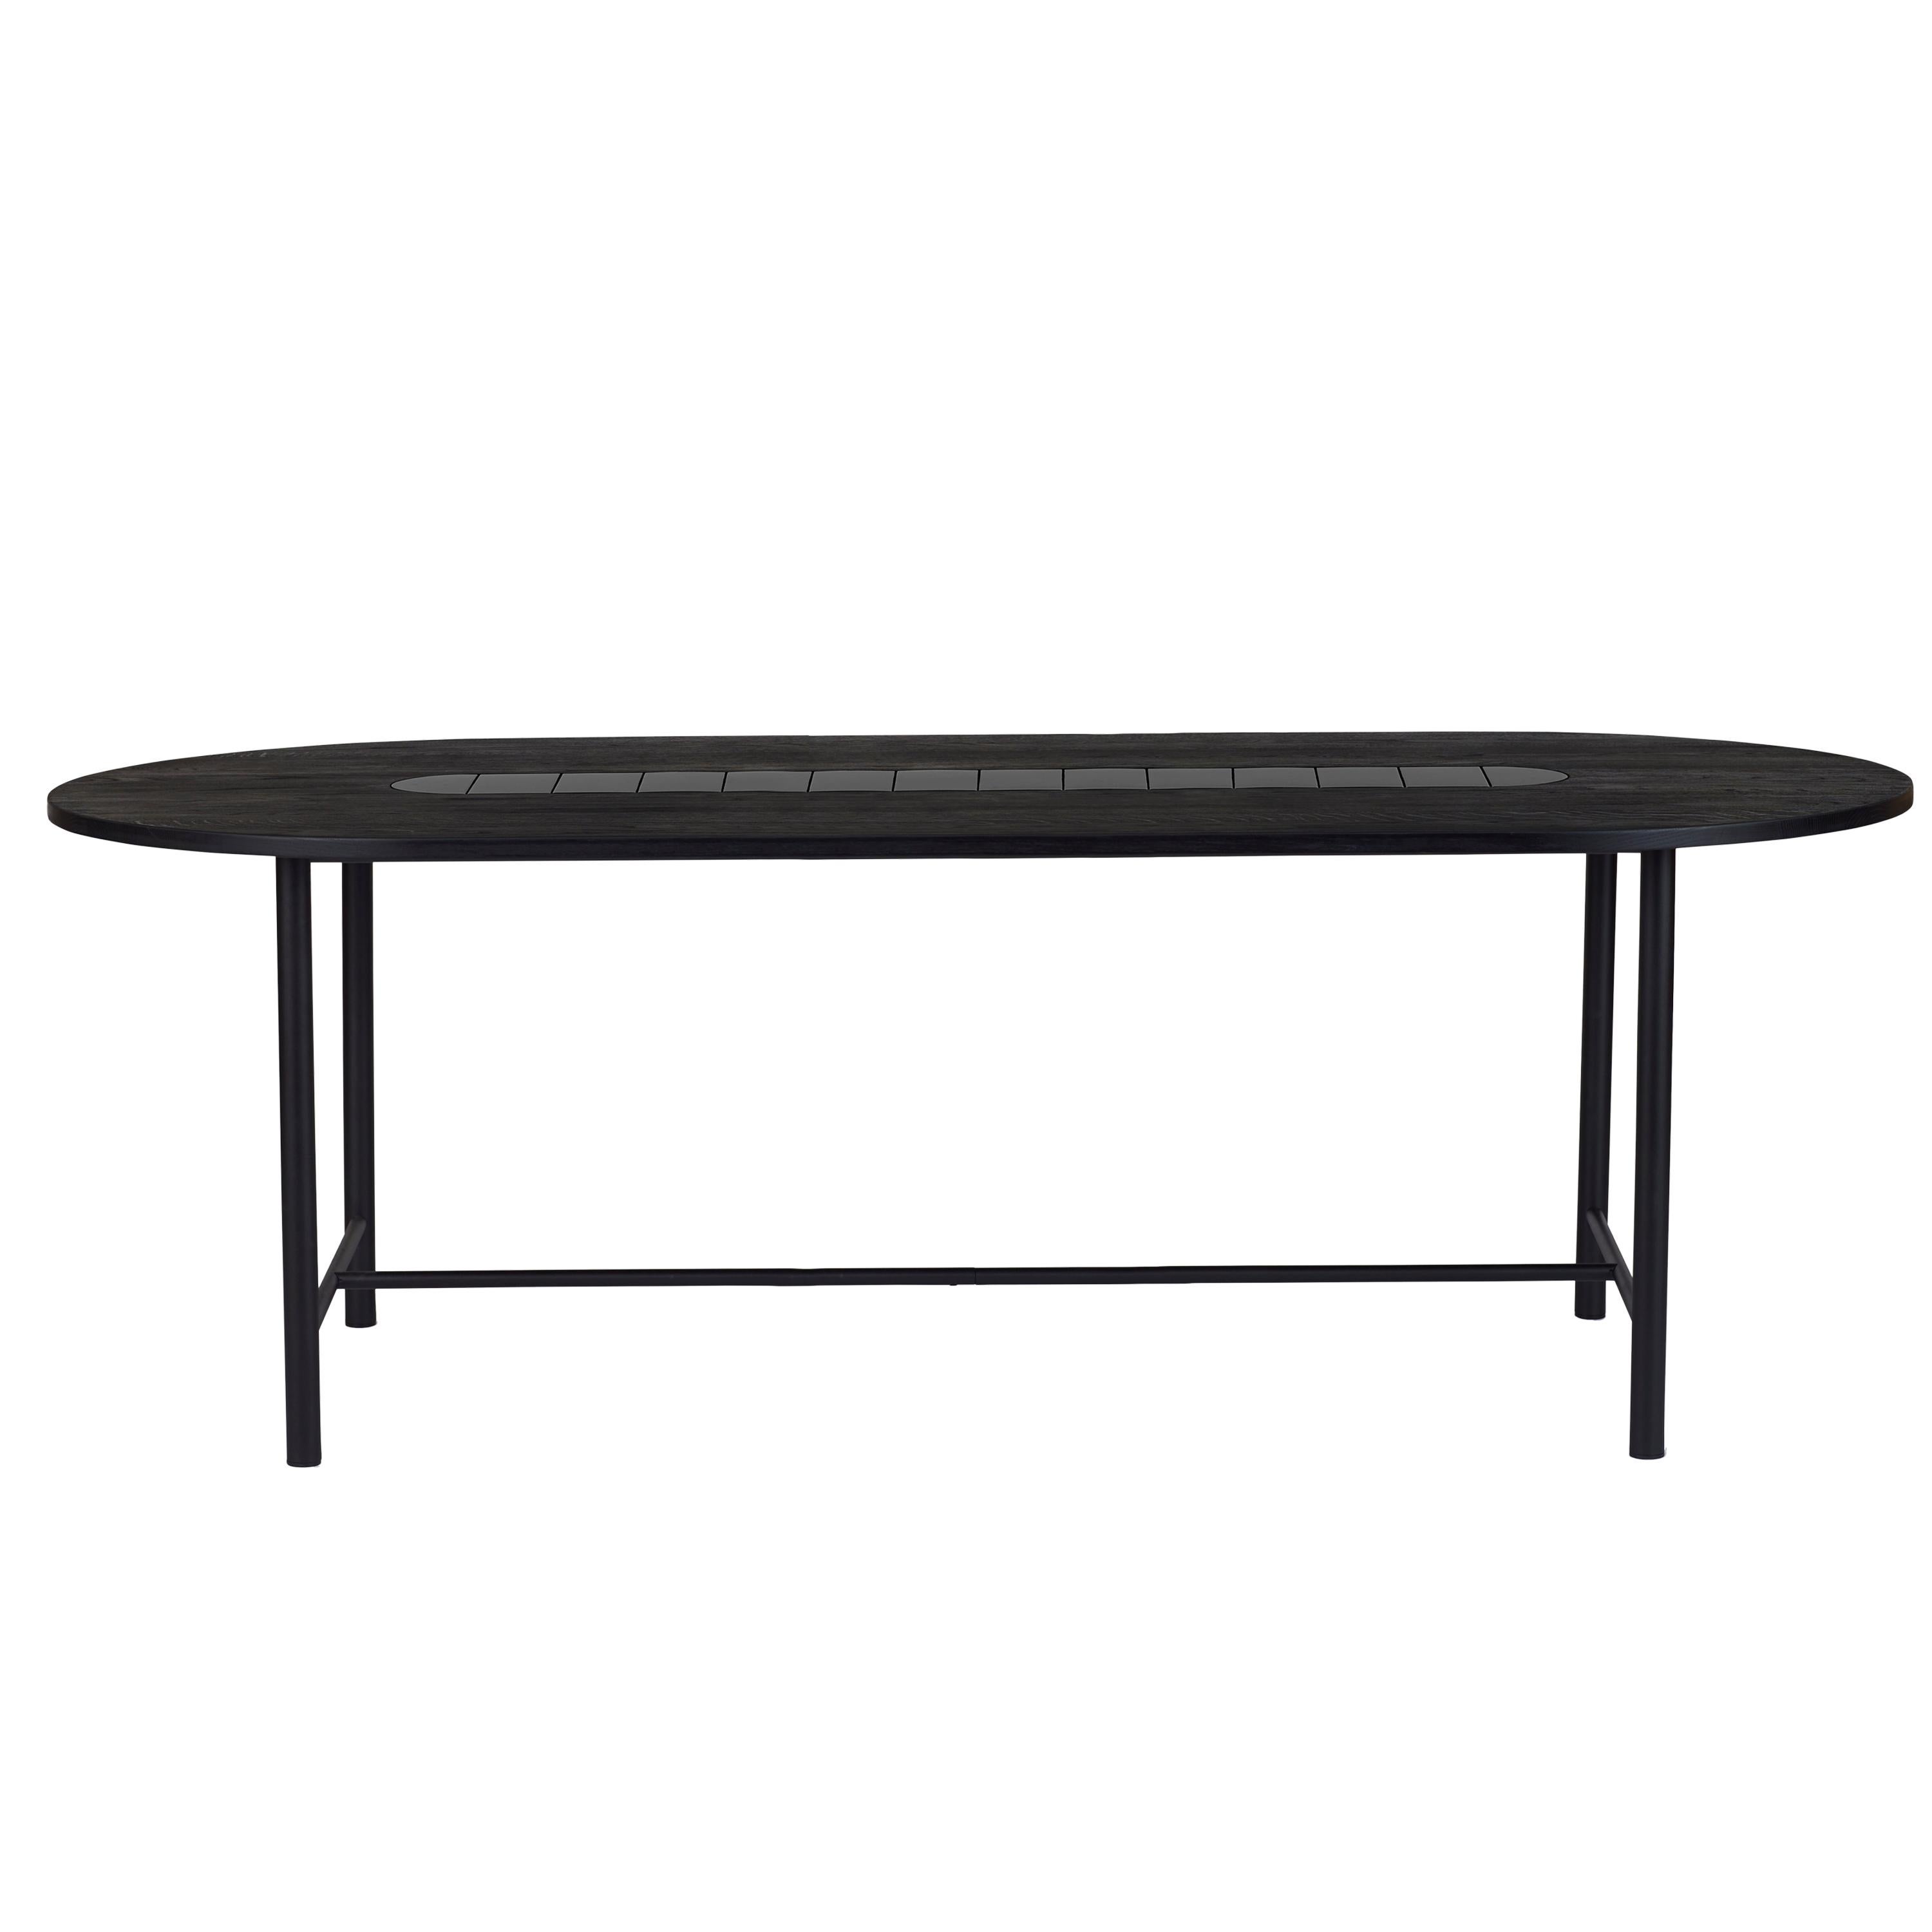 Be My Guest Large Dining Table, by Charlotte Høncke from Warm Nordic